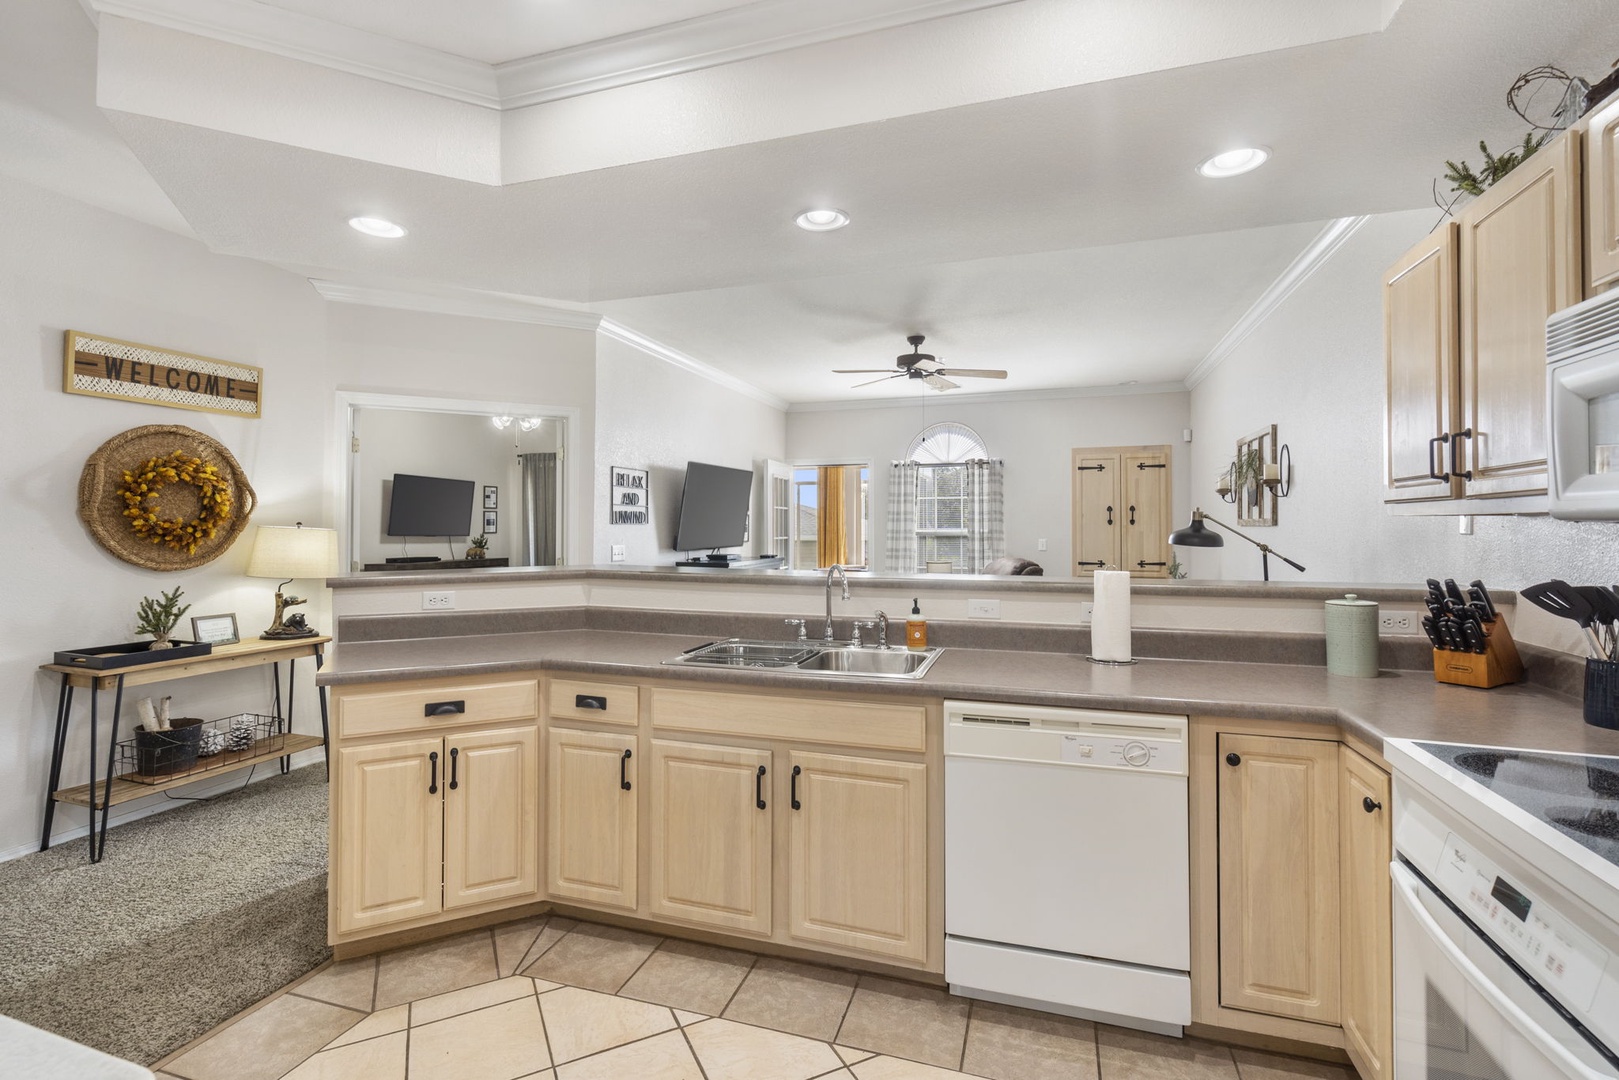 The open, airy kitchen is spacious & offers all the comforts of home